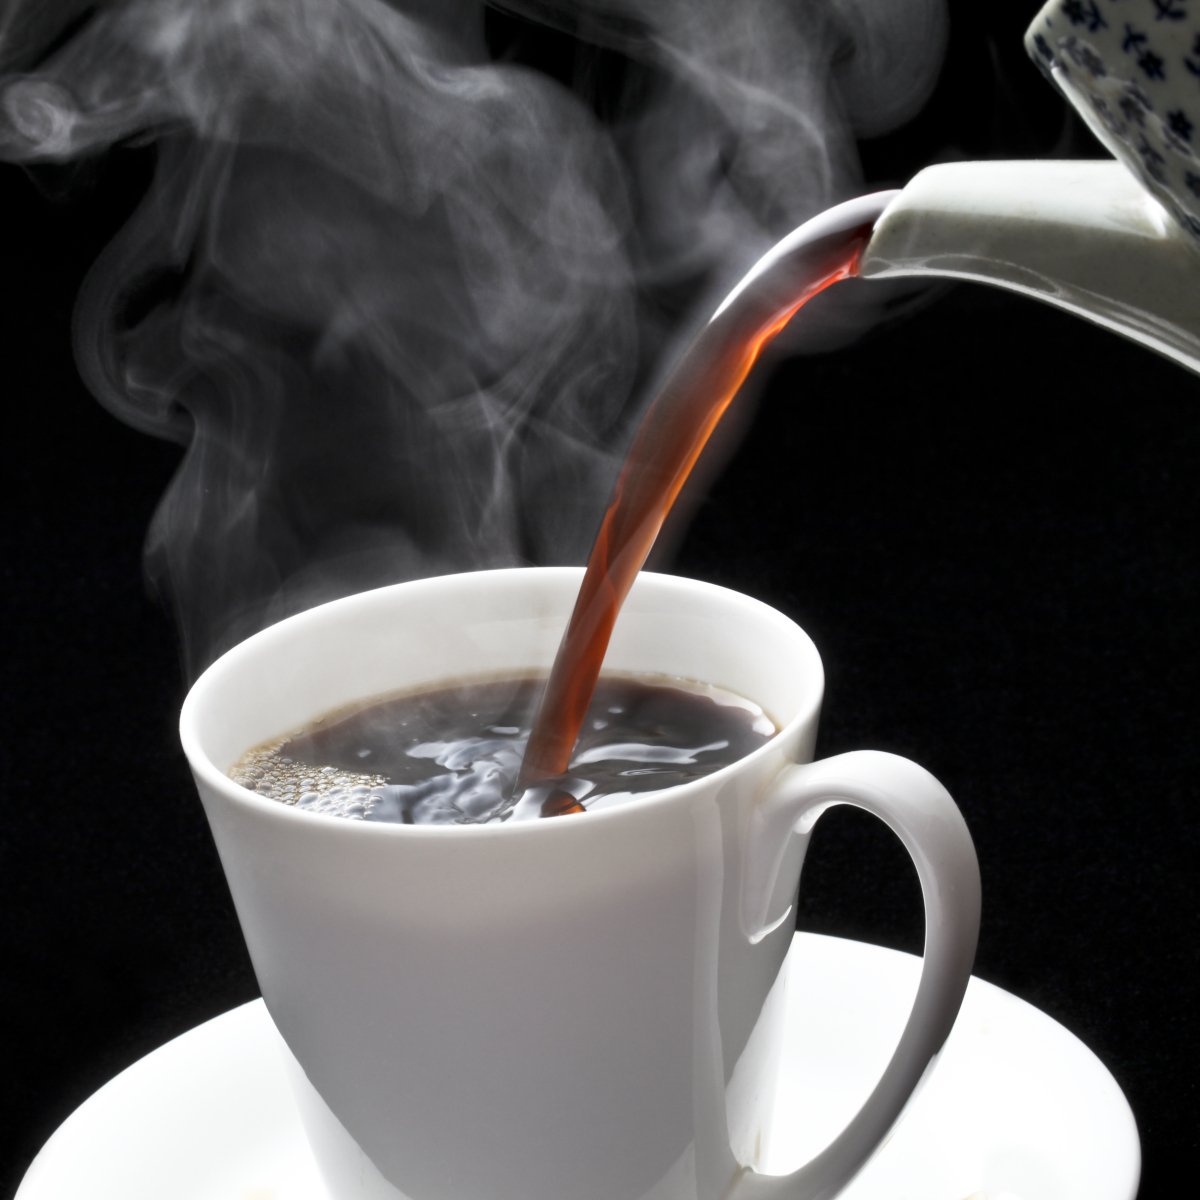 pouring-hot-coffee-on-a-white-cup-from-a-kettle